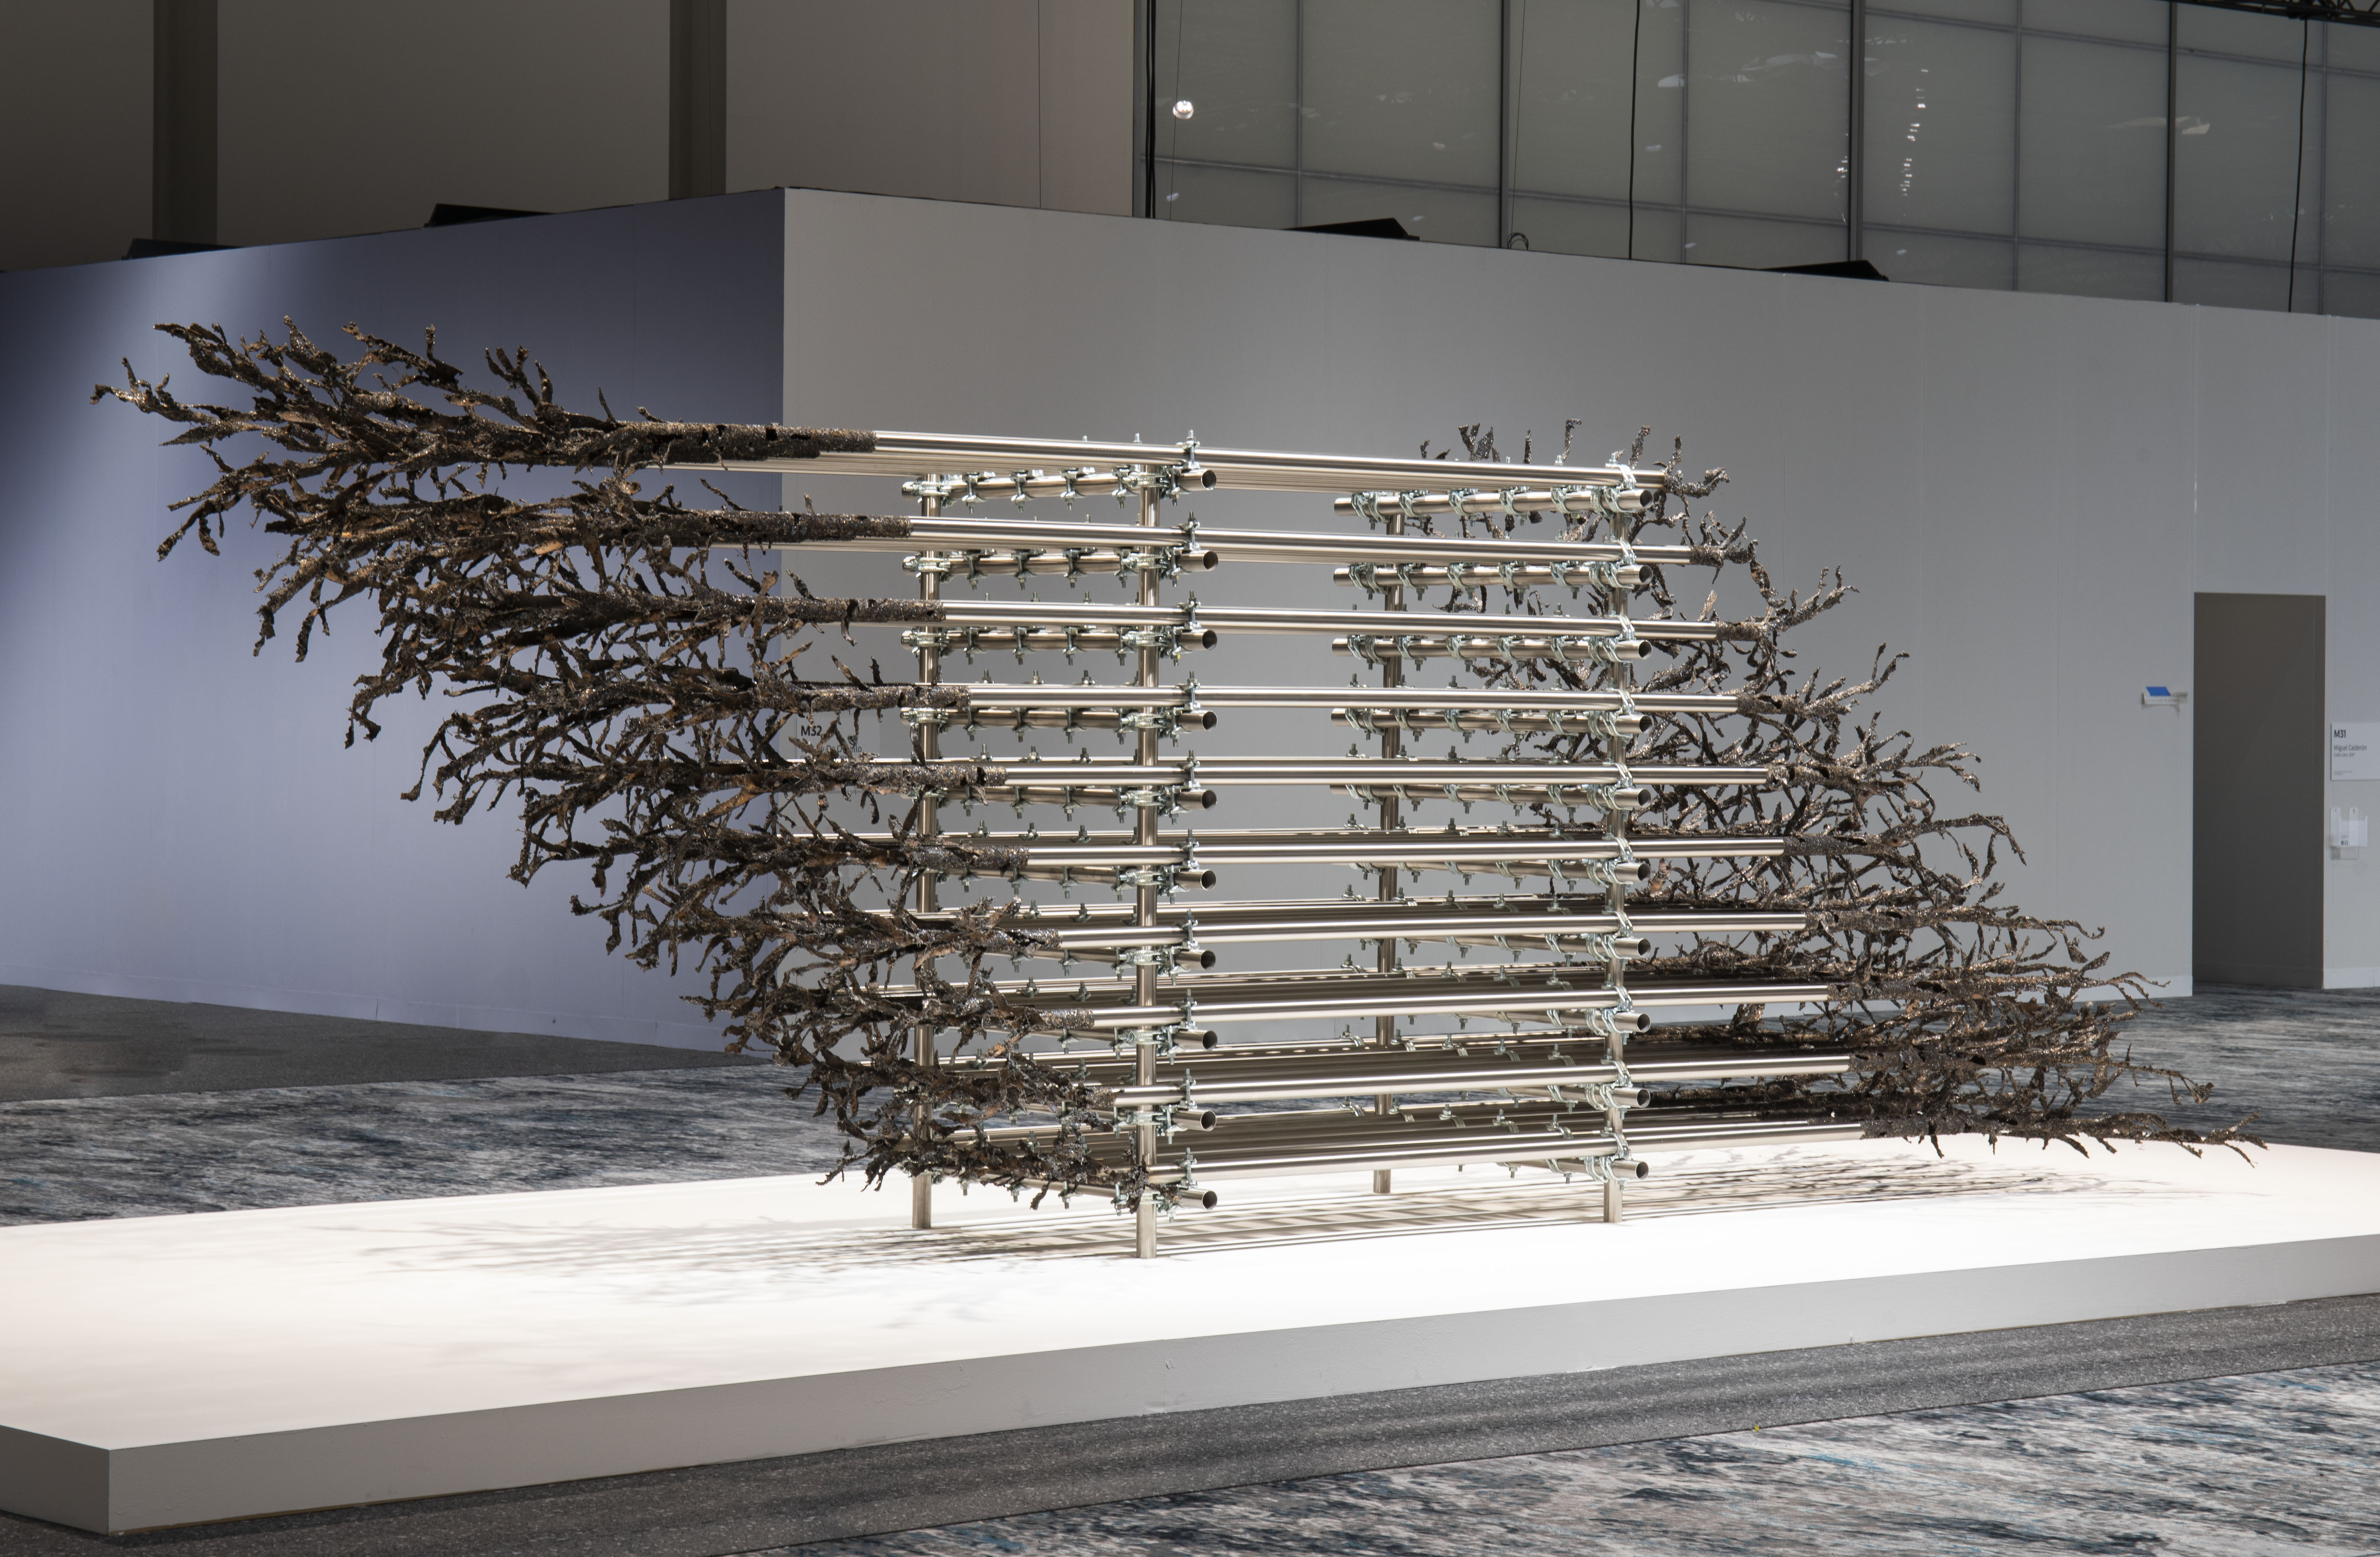 Luciana Lamothe.<em> Brutal Ambivalence</em>, 2019. Steel pipes and clamps, 76 3/4 x 236 1/4 x 47 1/4 inches (195 x 600 x 120 cm)